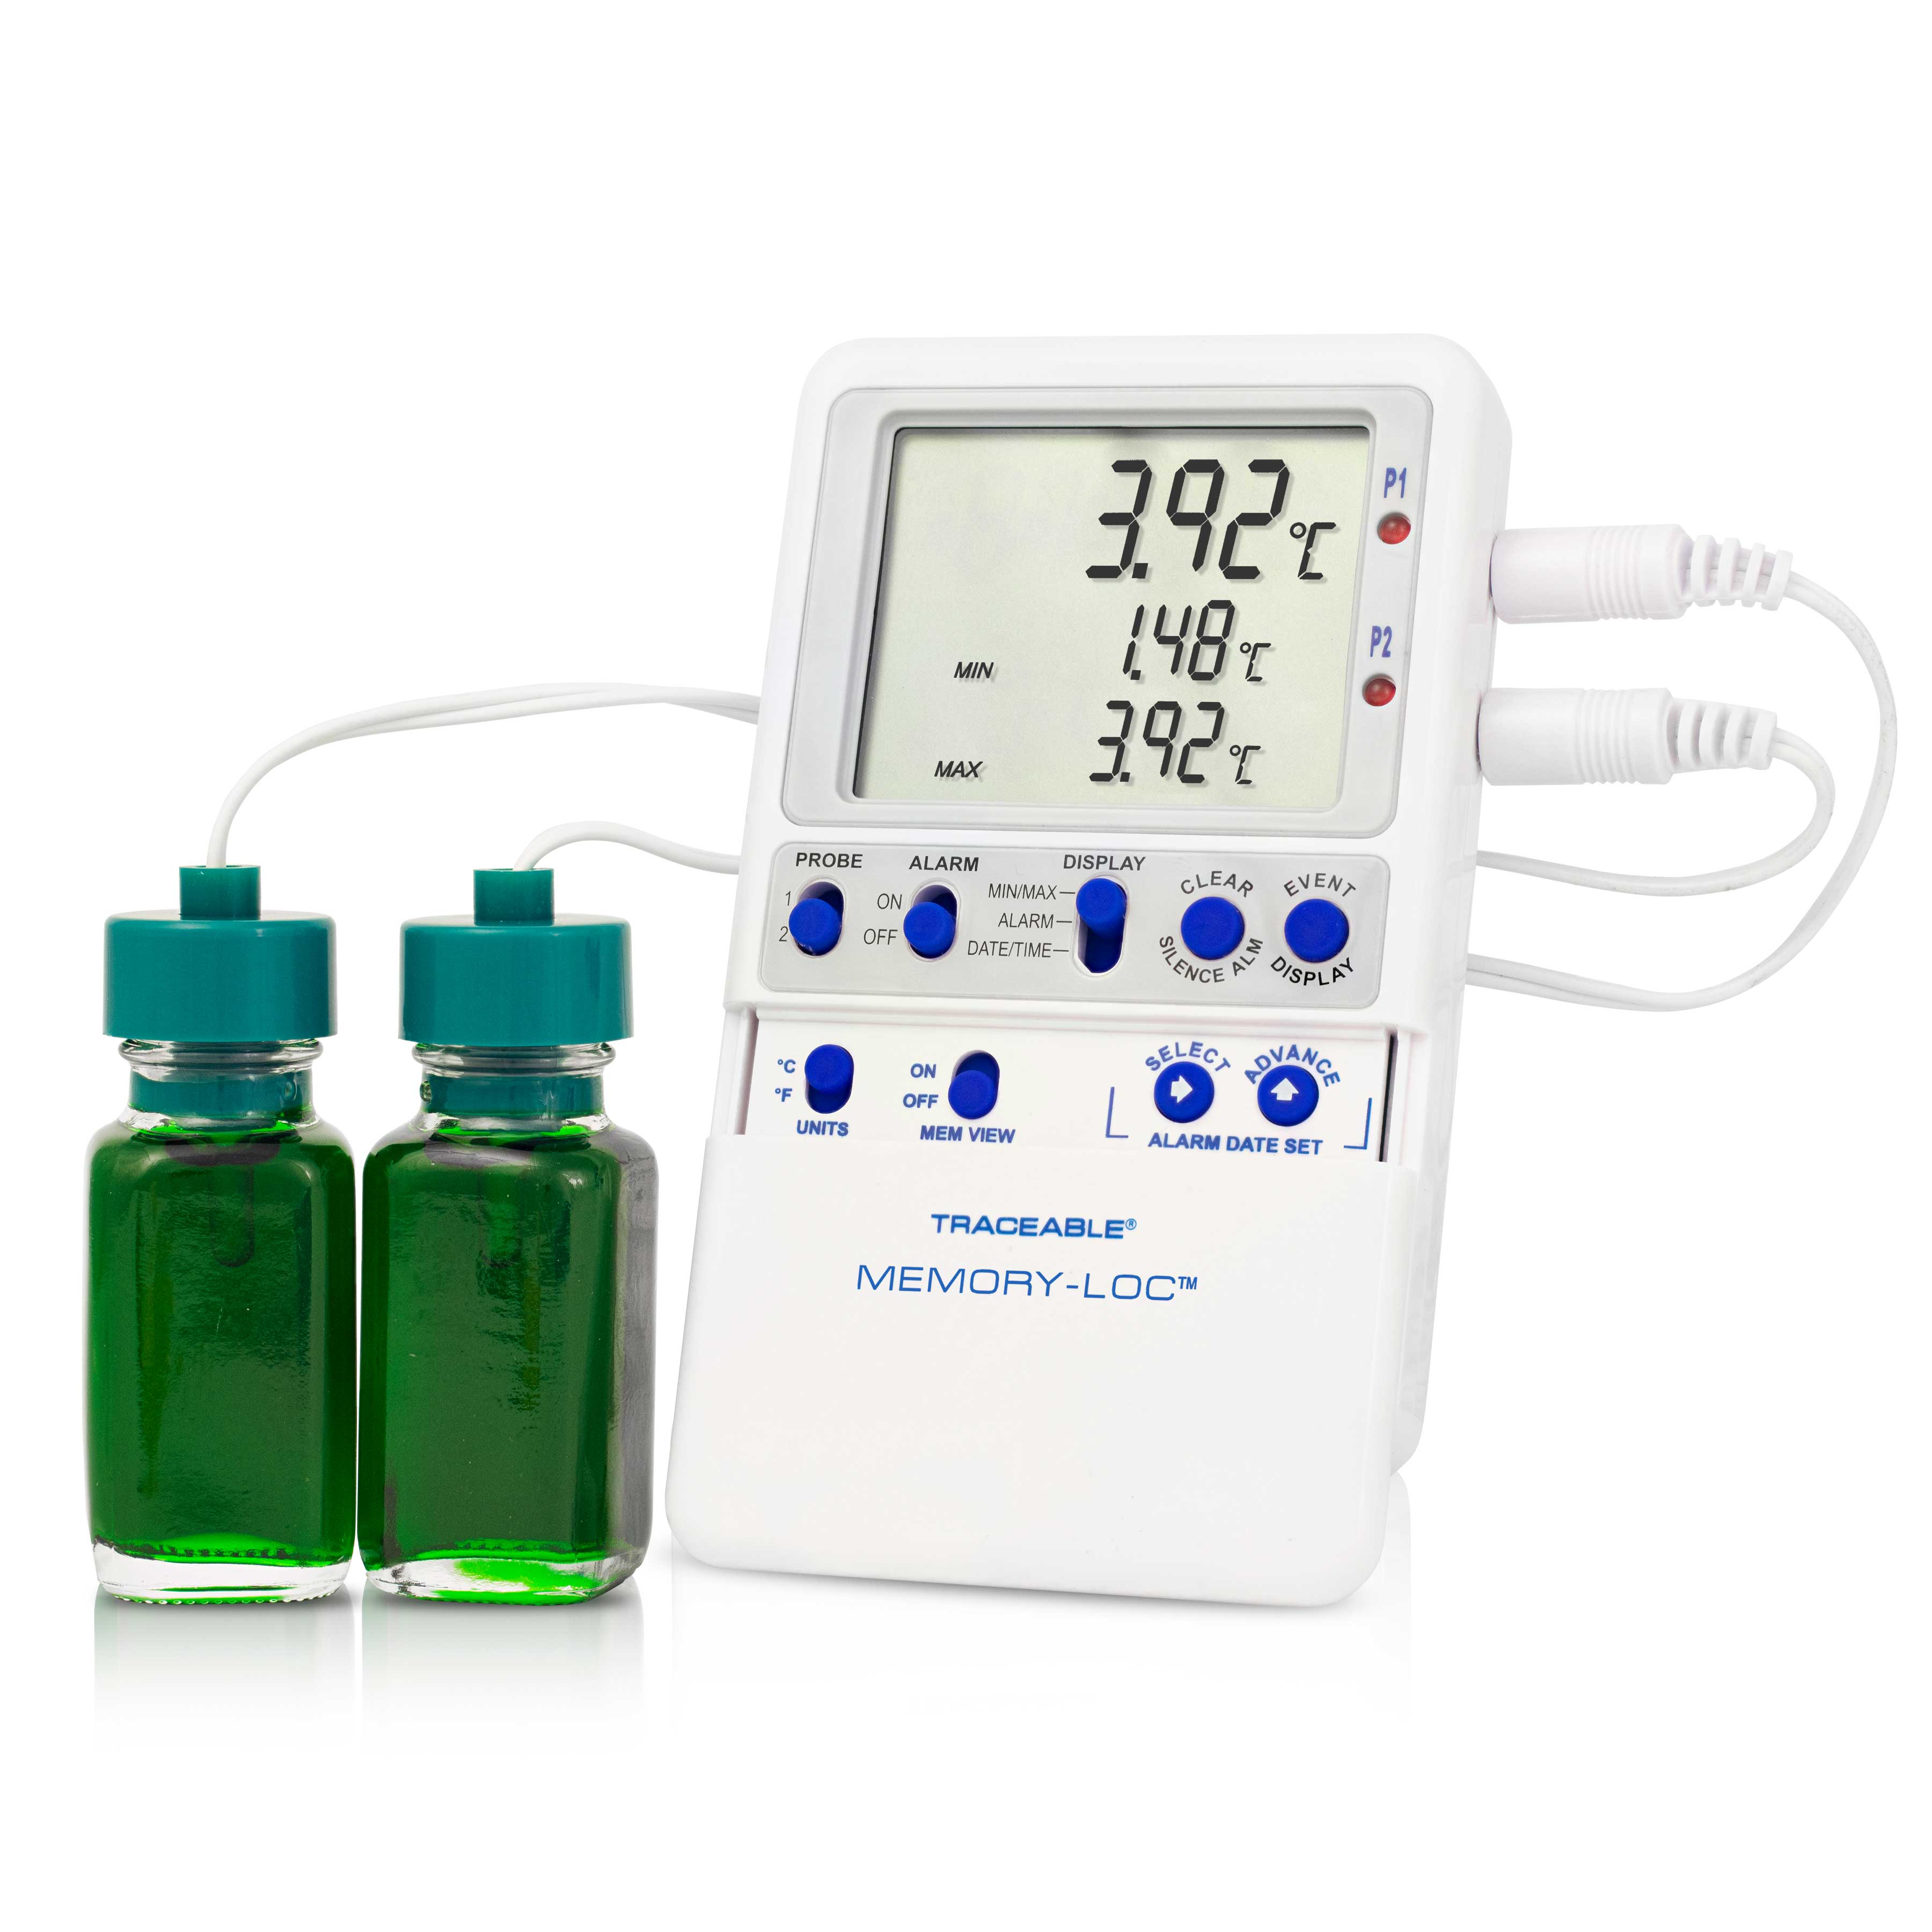 Memory-Loc datalogging digital thermometer. TRACEABLE. Range: –50.00 to 70.00°C. Accuracy: ±0.25°C. Resolution: 0.01°C. Probes: 2 bottles. Application: Refrigerators and Freezers